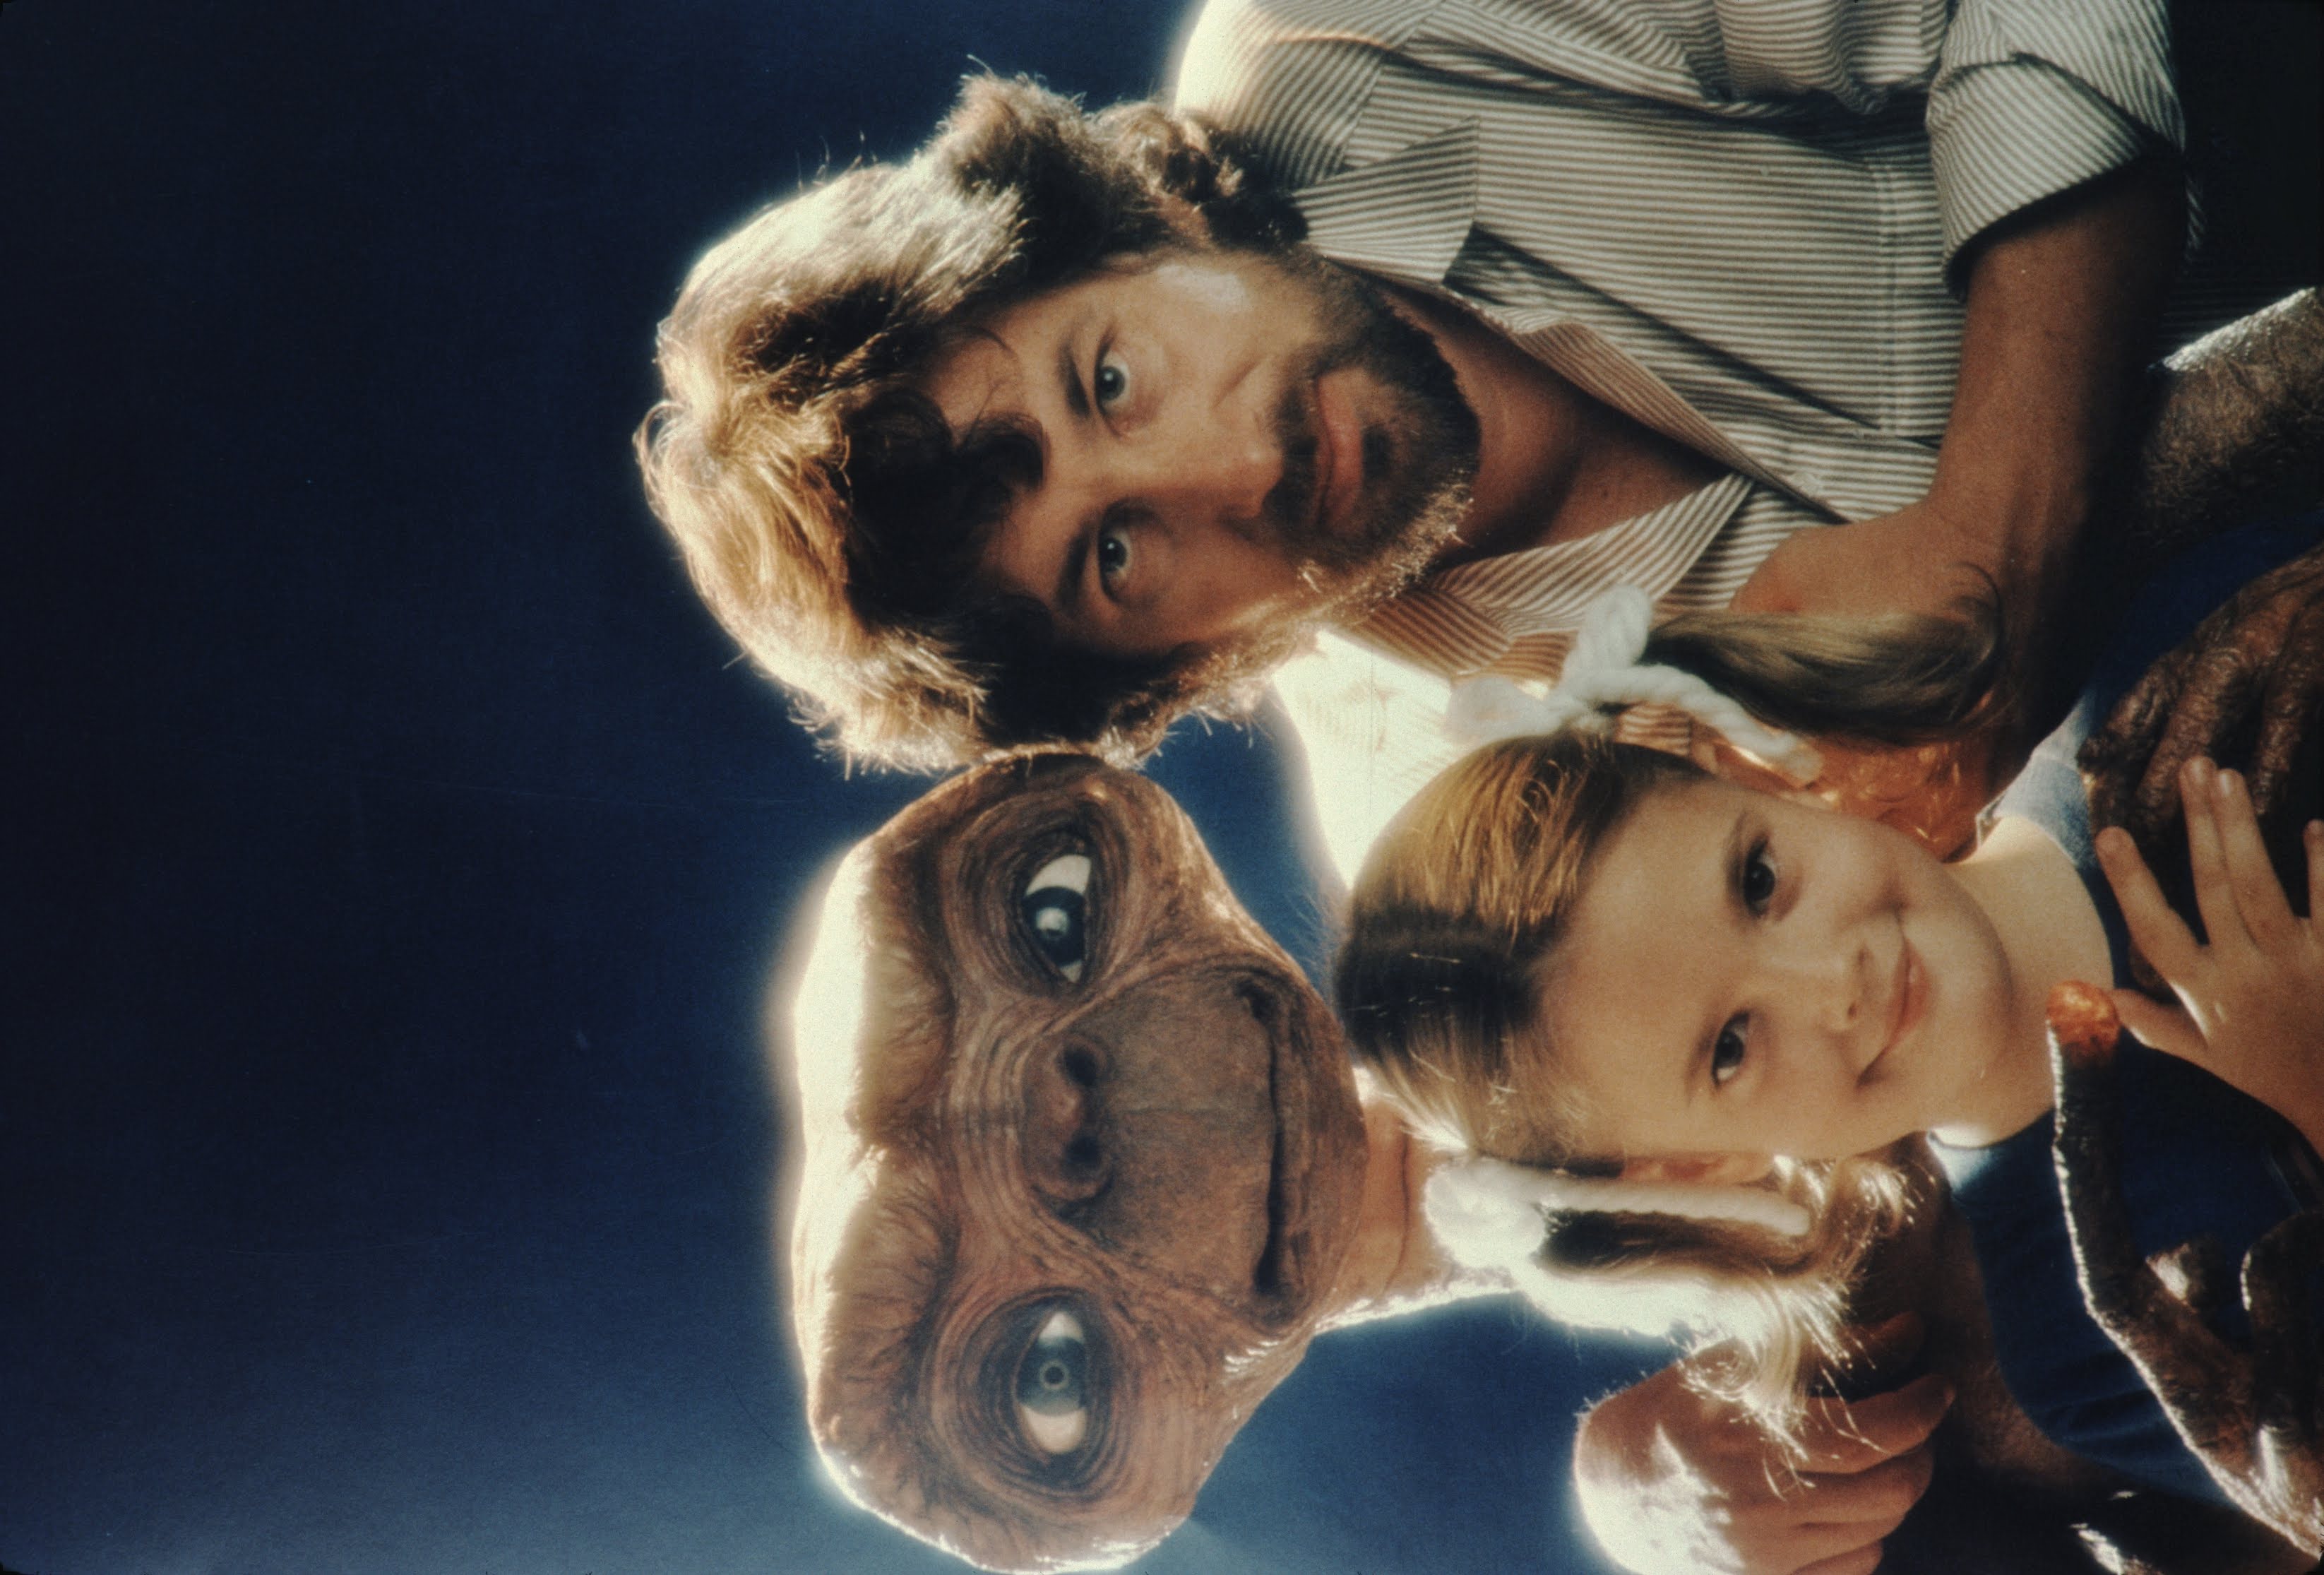 Steven Spielberg and the movie star pose with E.T. at Carlo Rimbaldi studio in Los Angeles, California in April, 1982. | Source: Getty Images